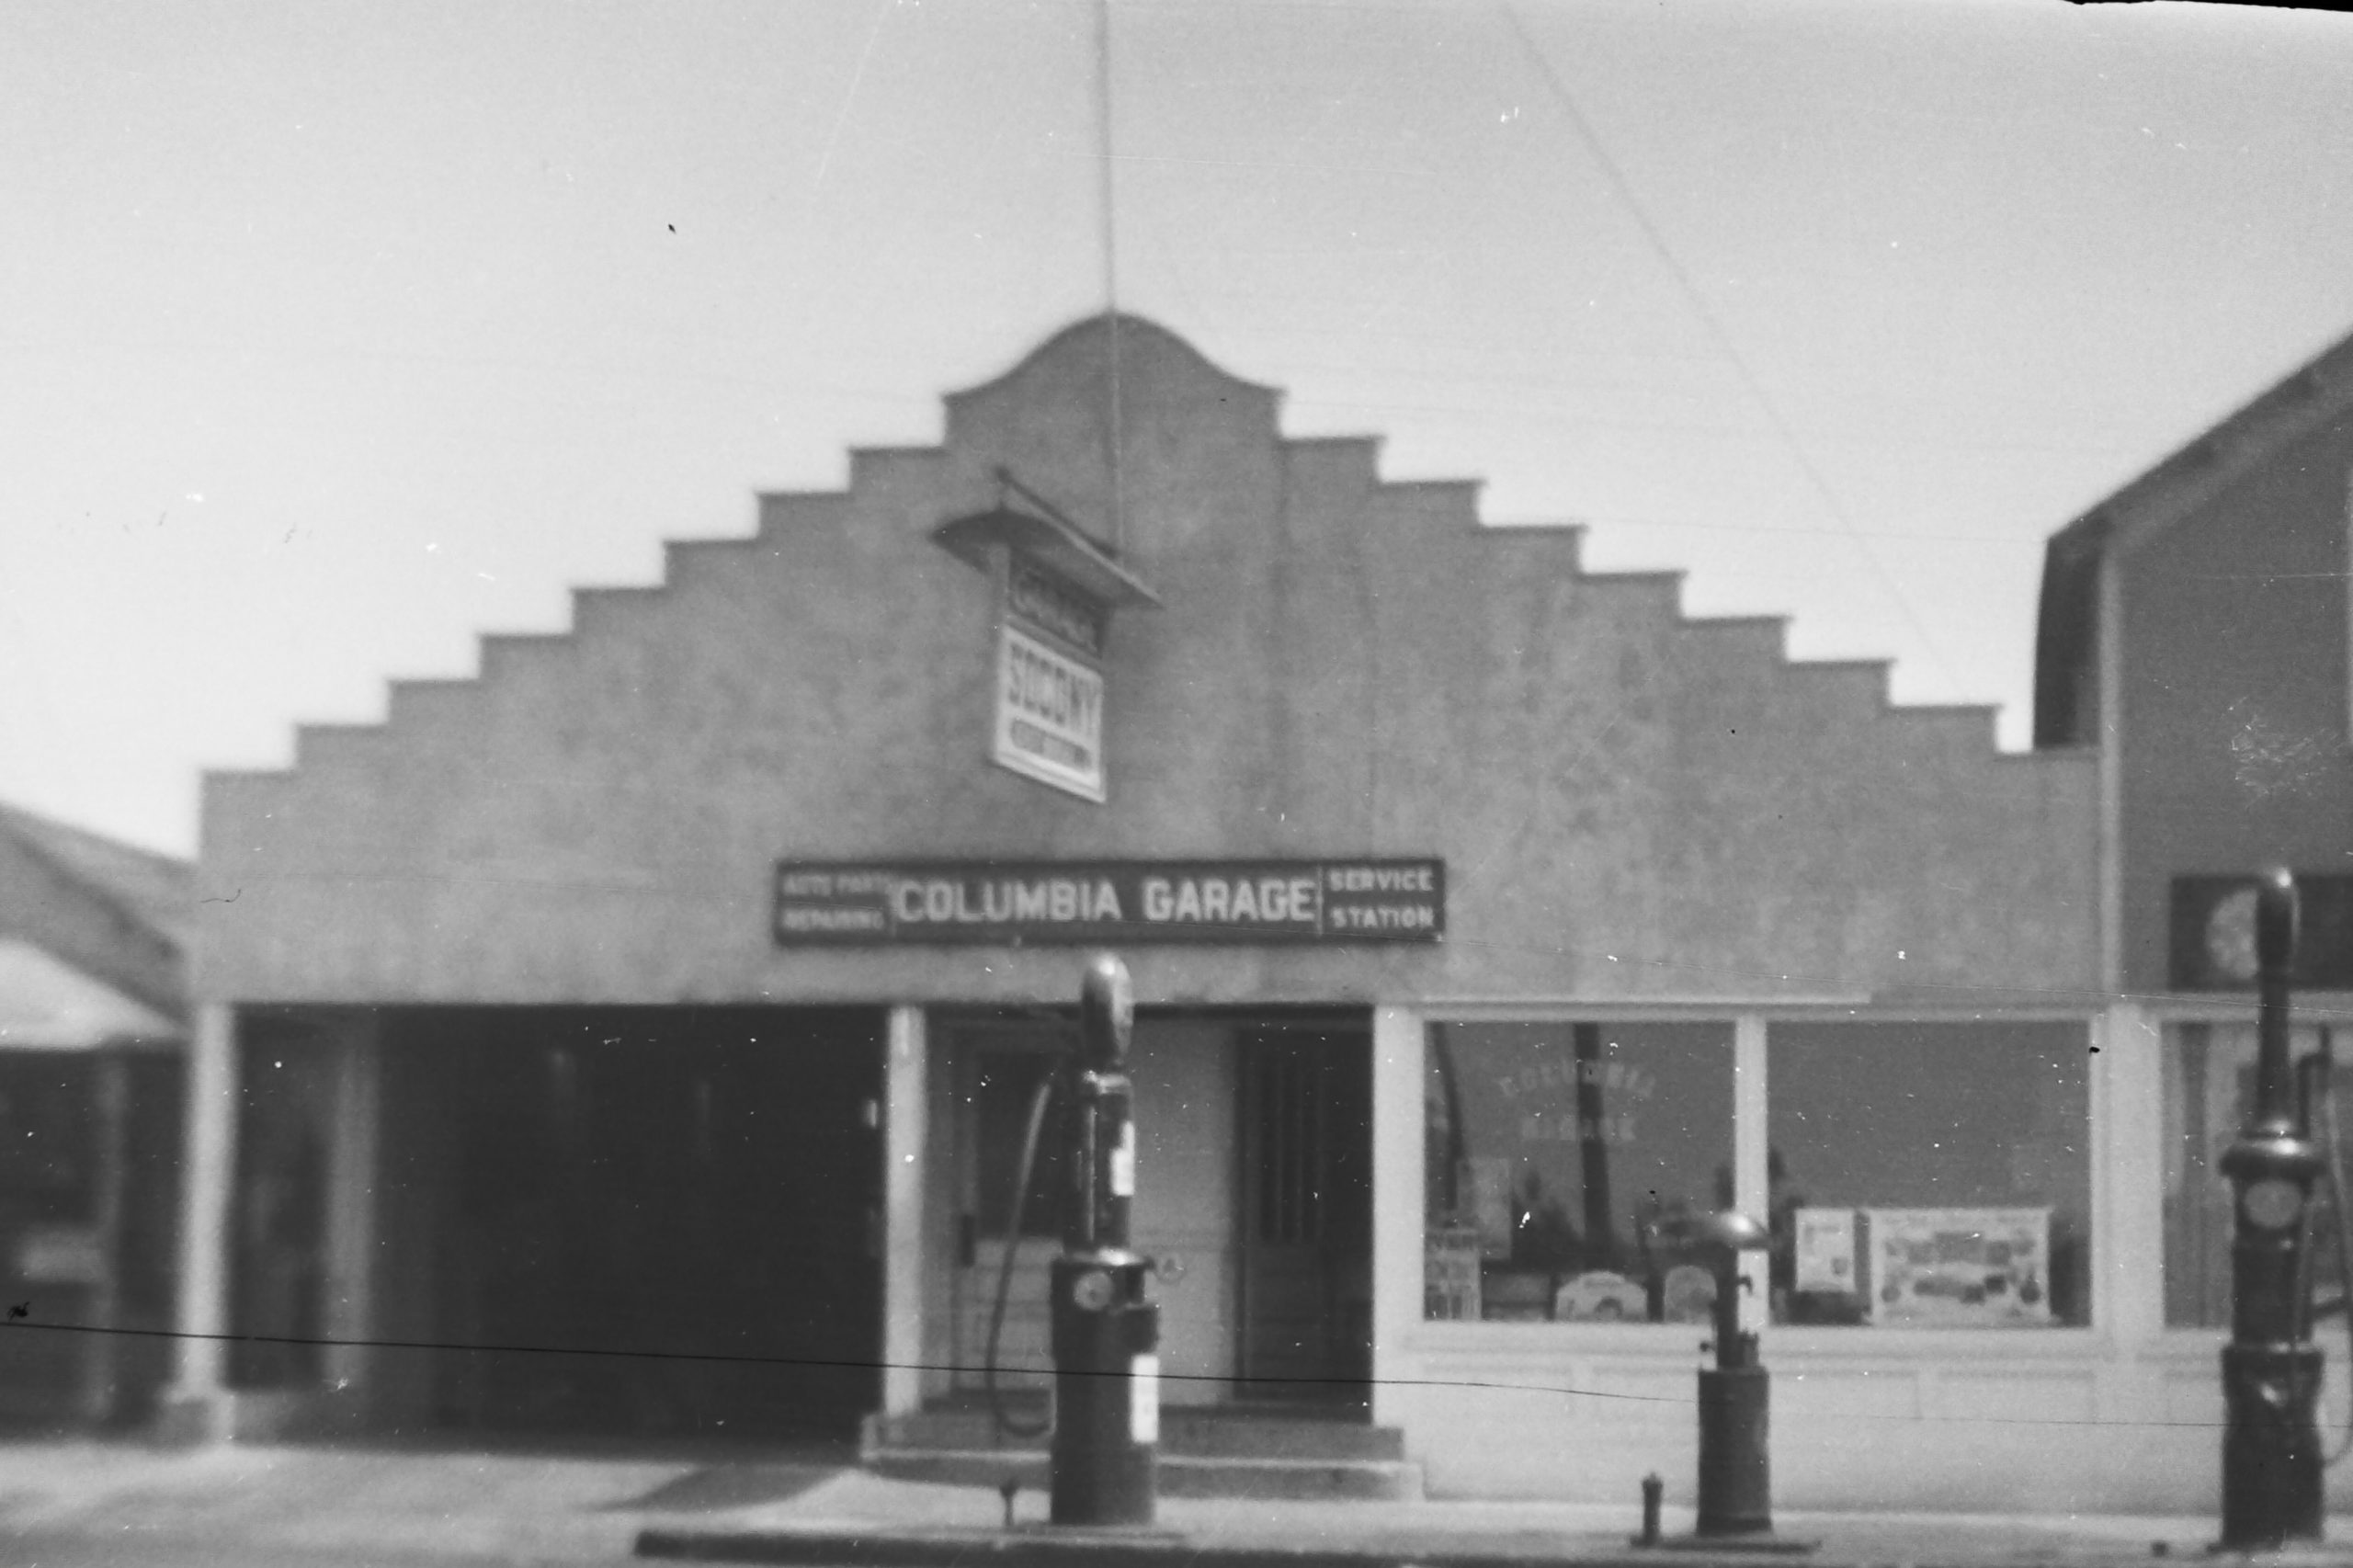 The facade of what was once Columbia Garage still exists today as Village Prime Meat Shoppe and Martin's Design & Construction Consultants.